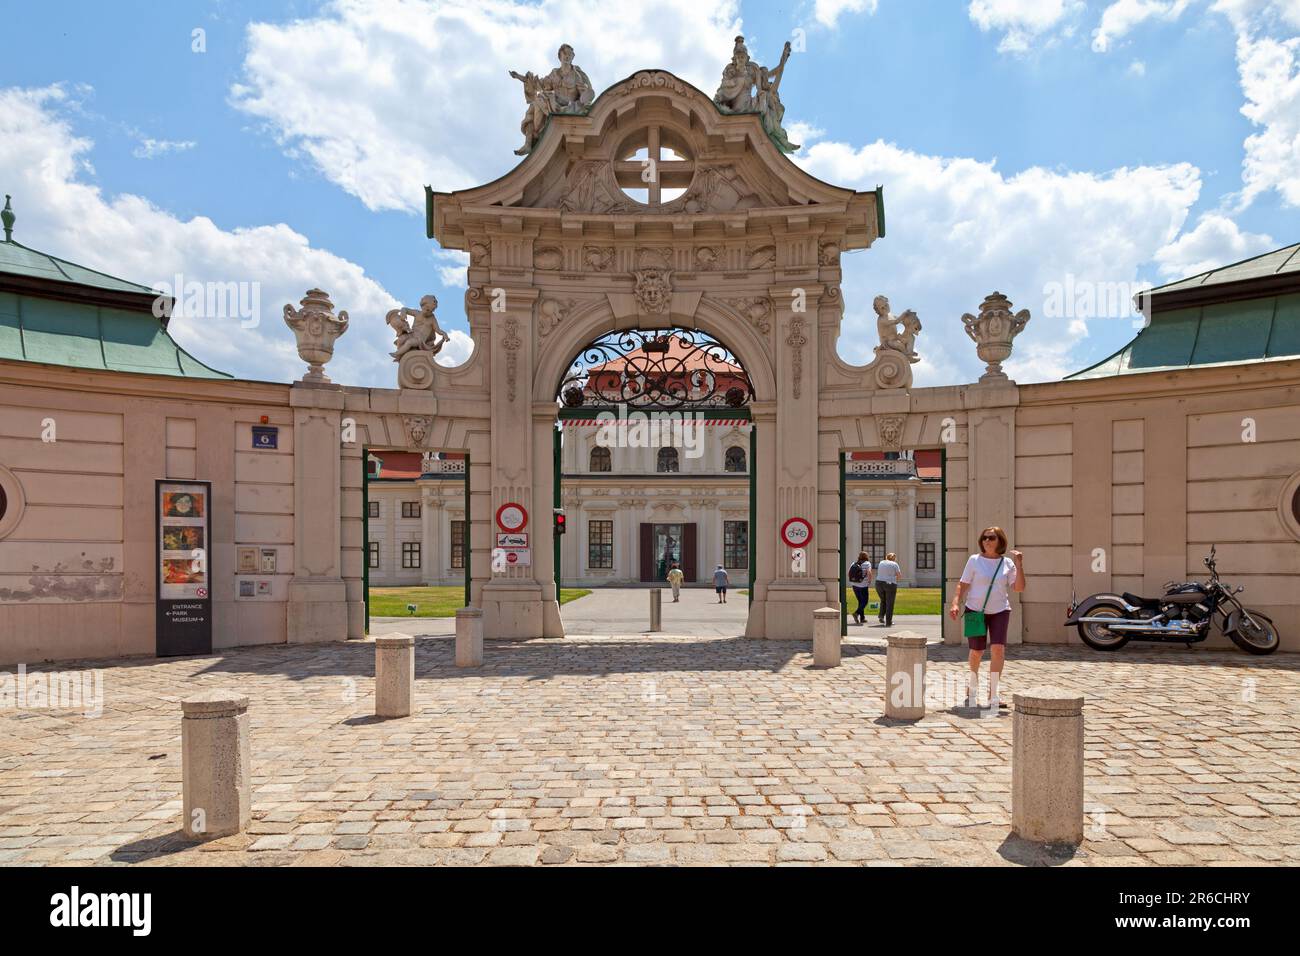 Vienna, Austria - June 17 2018: Main entrance of the Lower Belvedere, a Baroque palace built in the 18th-century. It is part of the Belvedere complex. Stock Photo